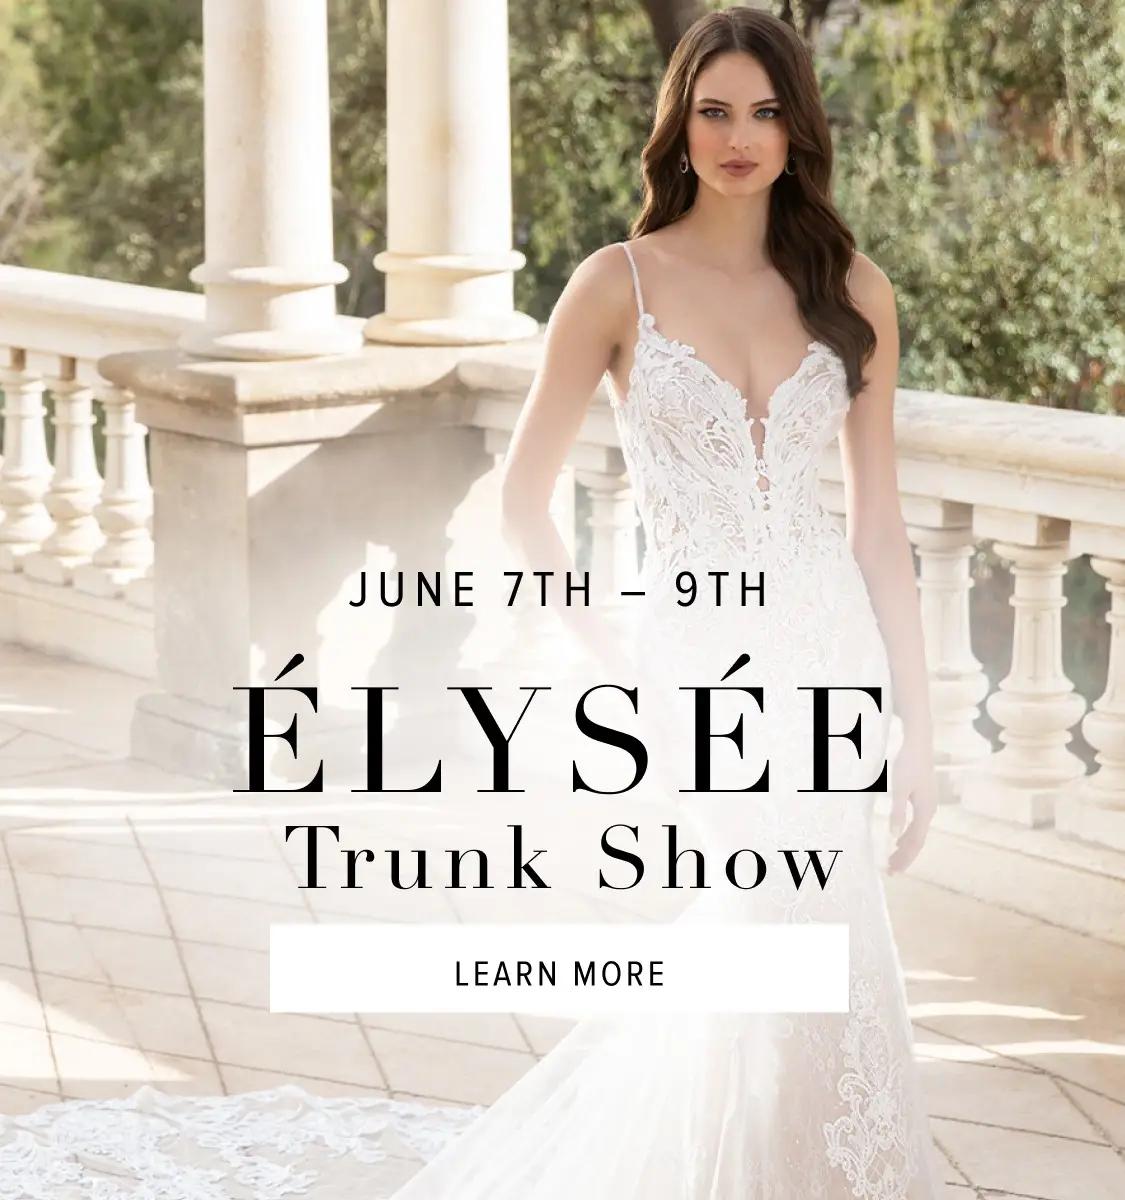 Elysee Trunk Show mobile banner